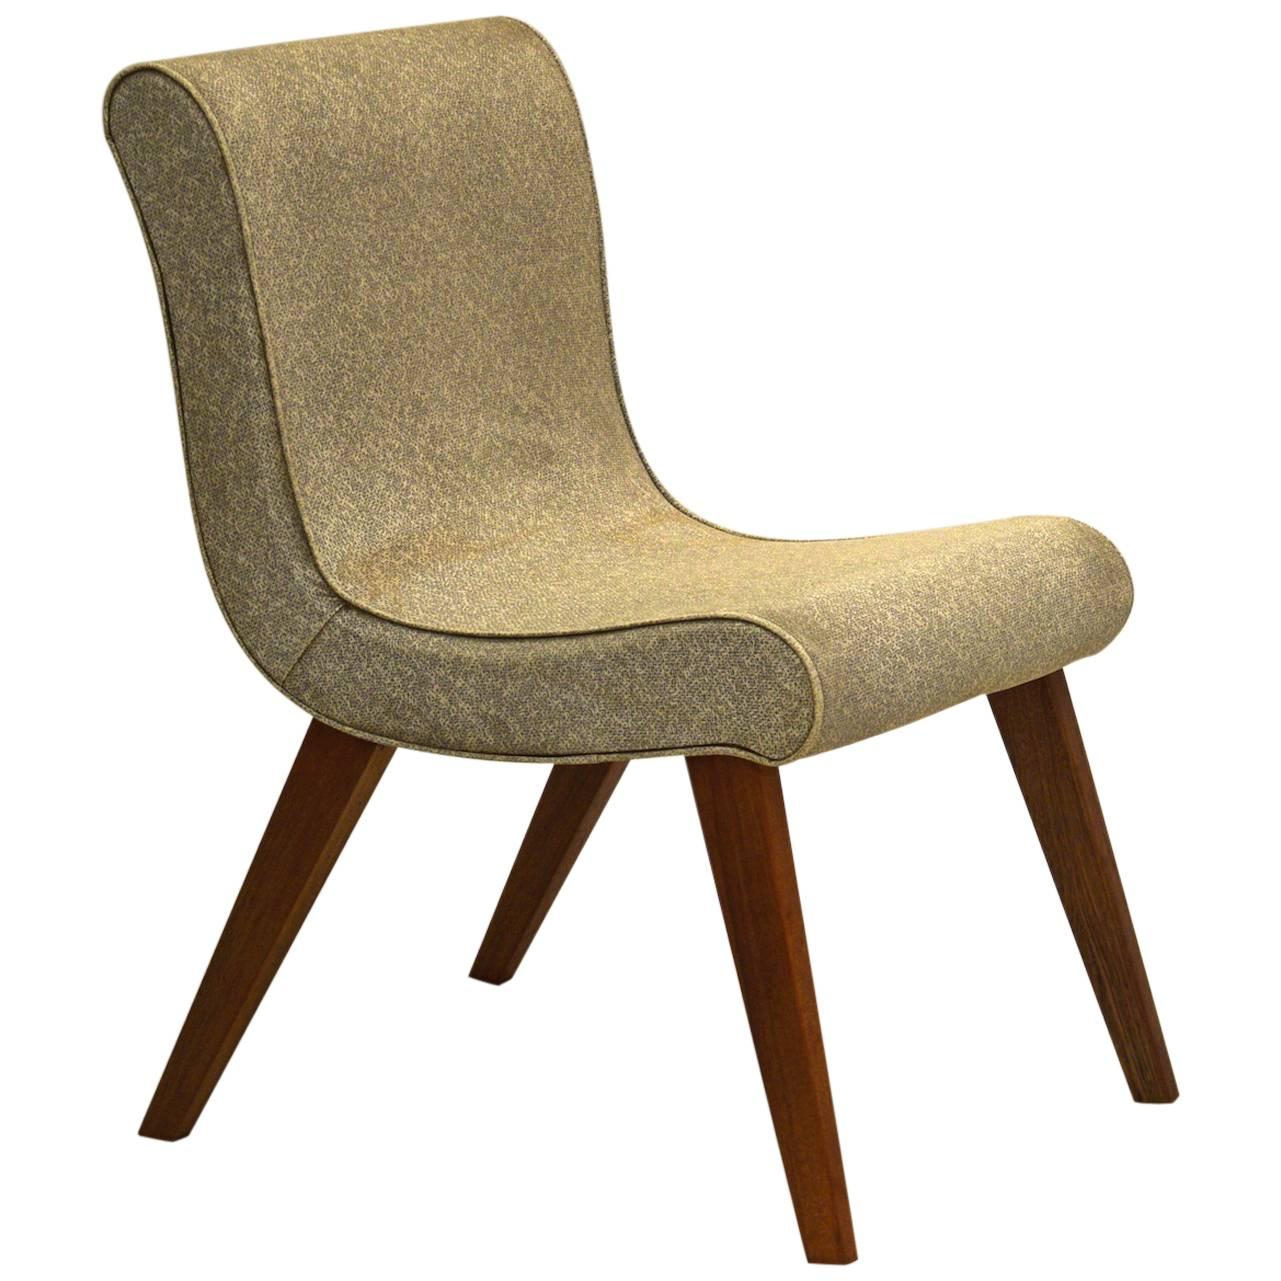 Early Chair Attributed to Jens Risom for Knoll